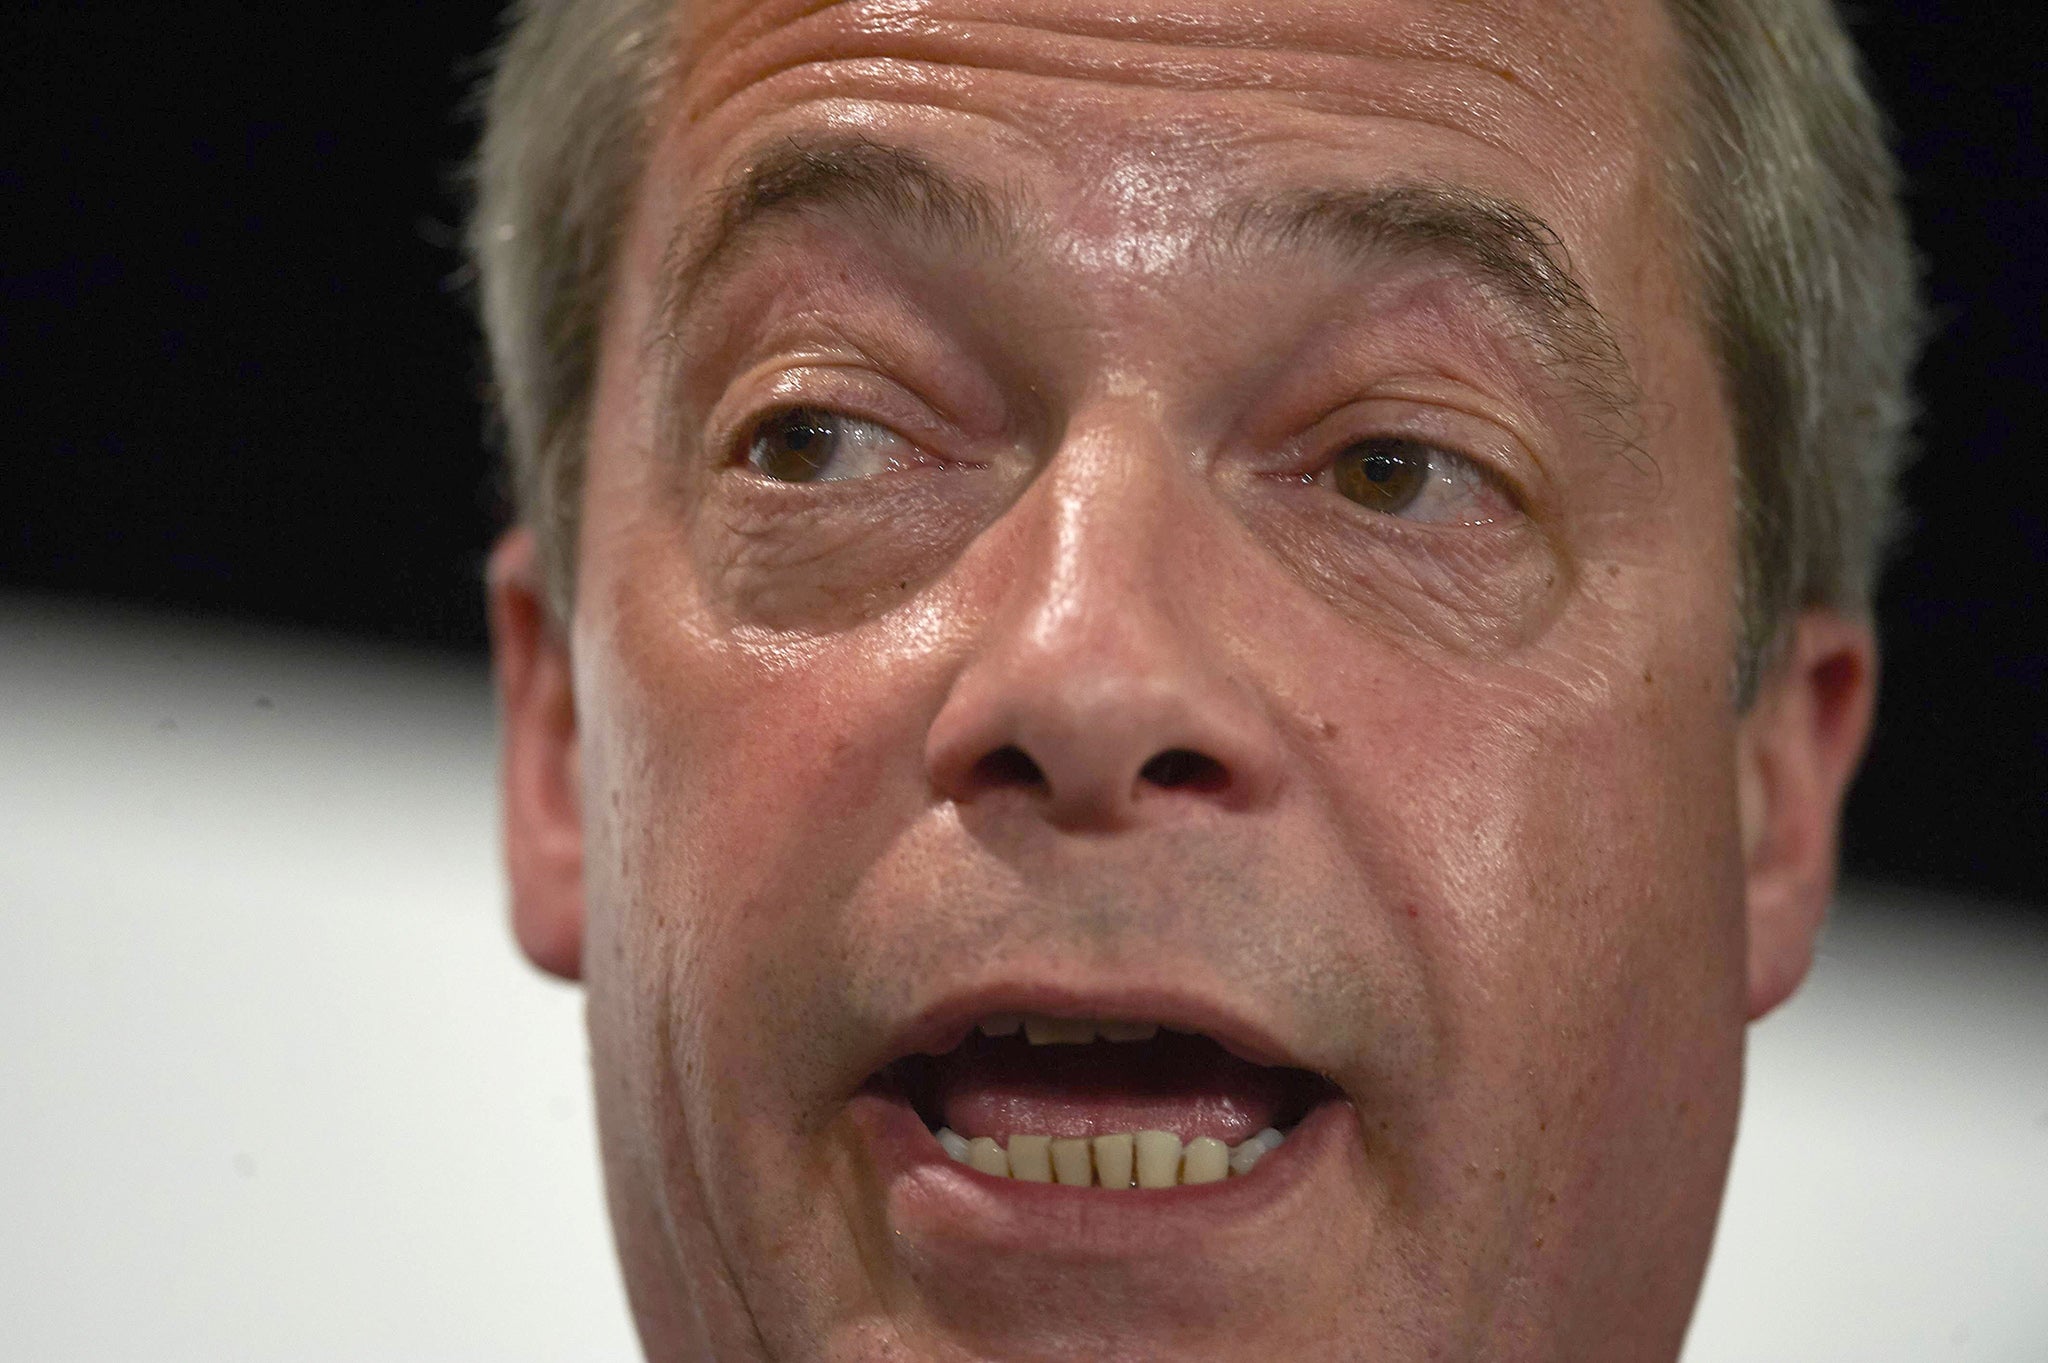 Nigel Farage conceded defeat in the South Thanet poll on Friday morning